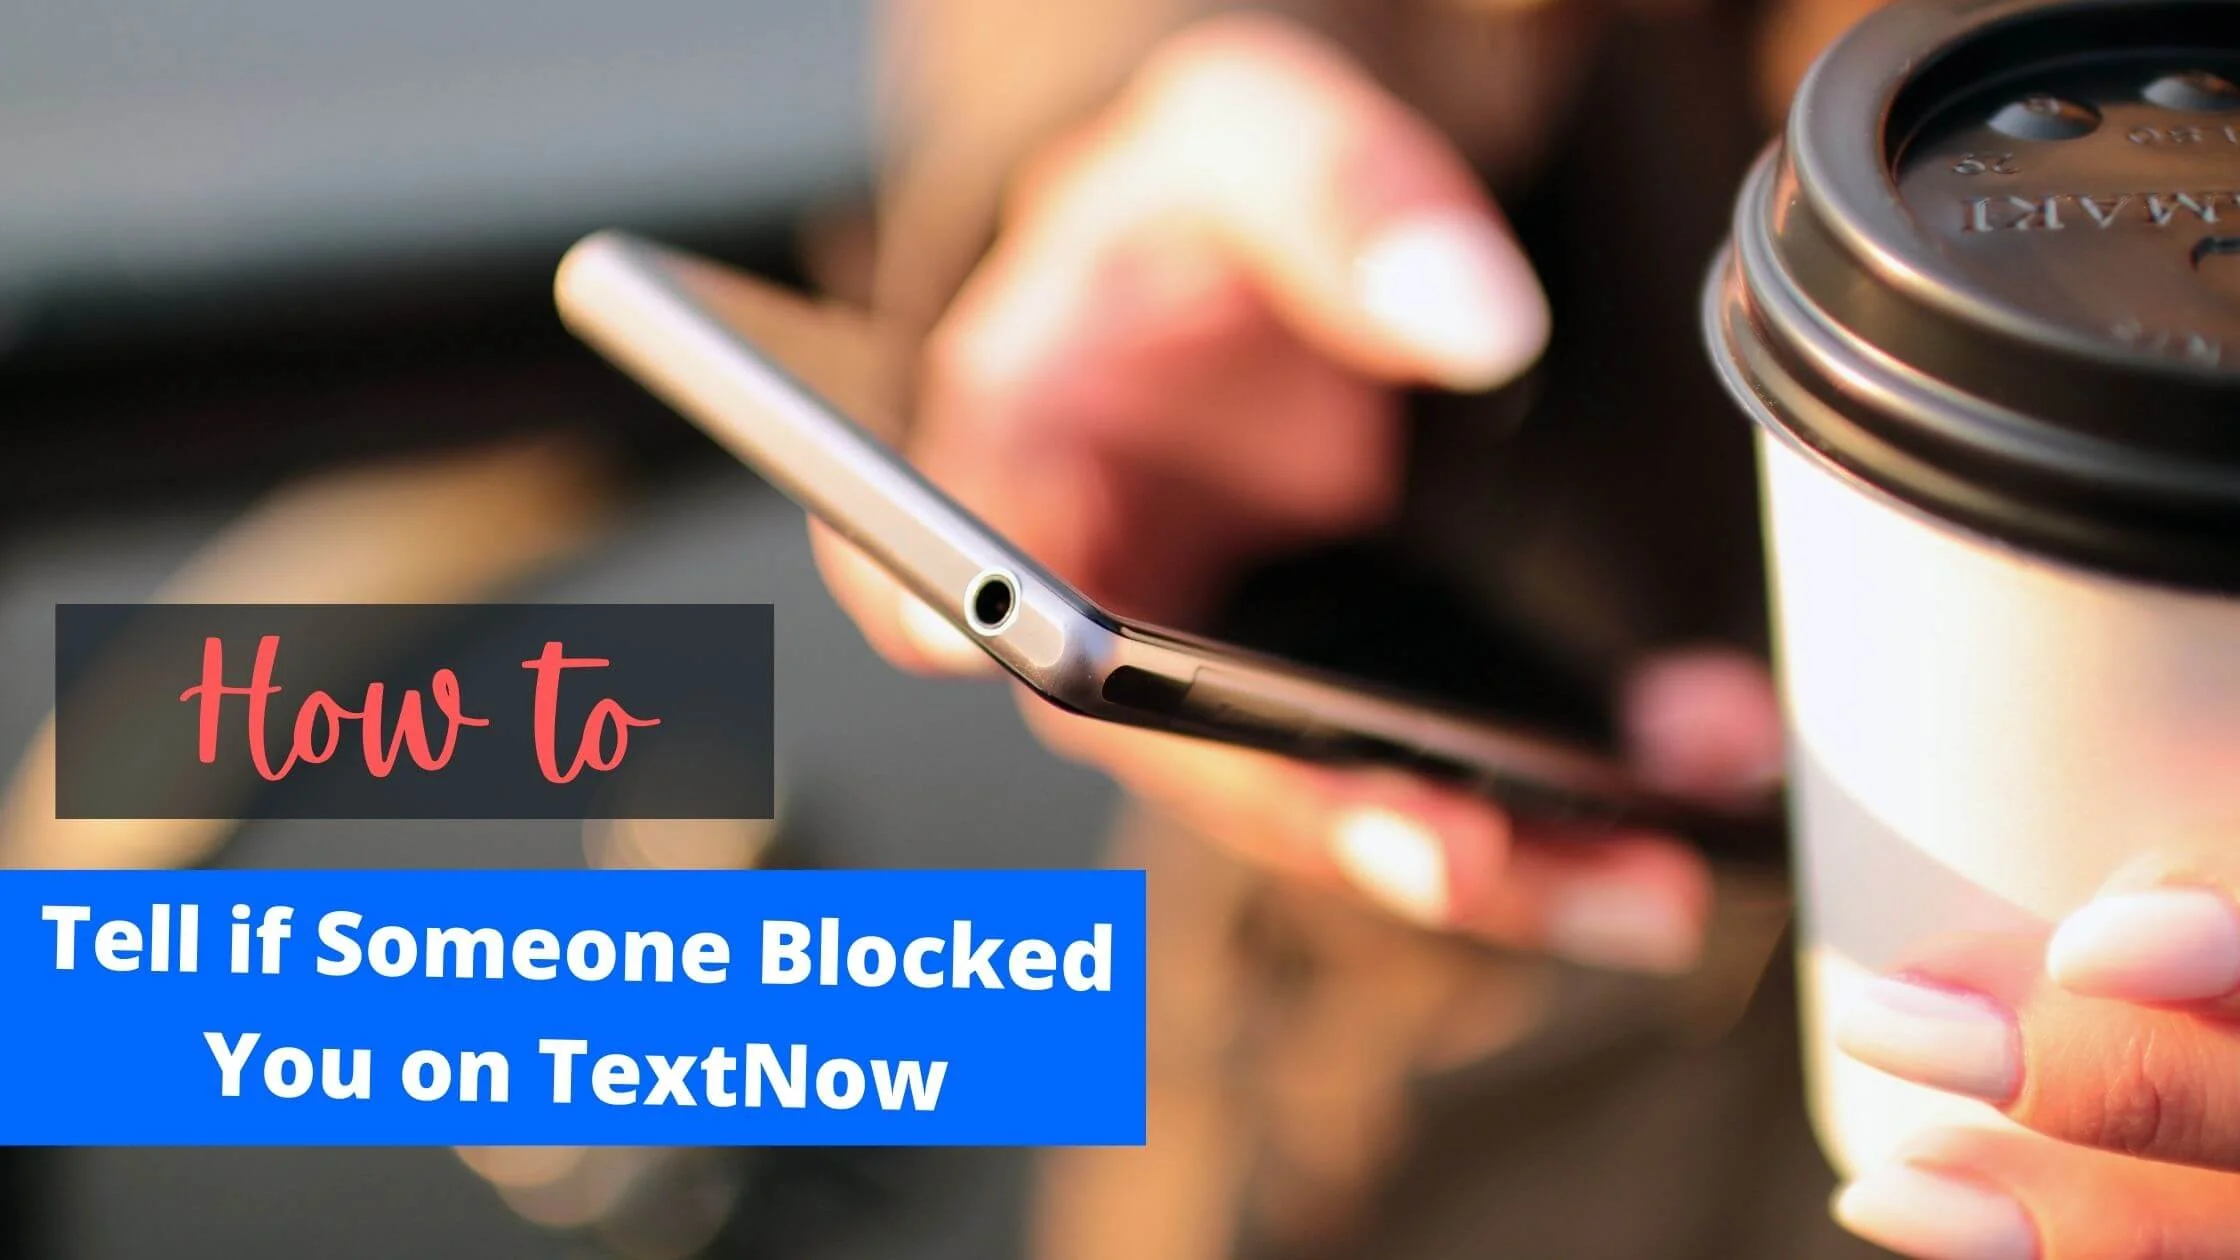 Tell if Someone blocked you on TextNow